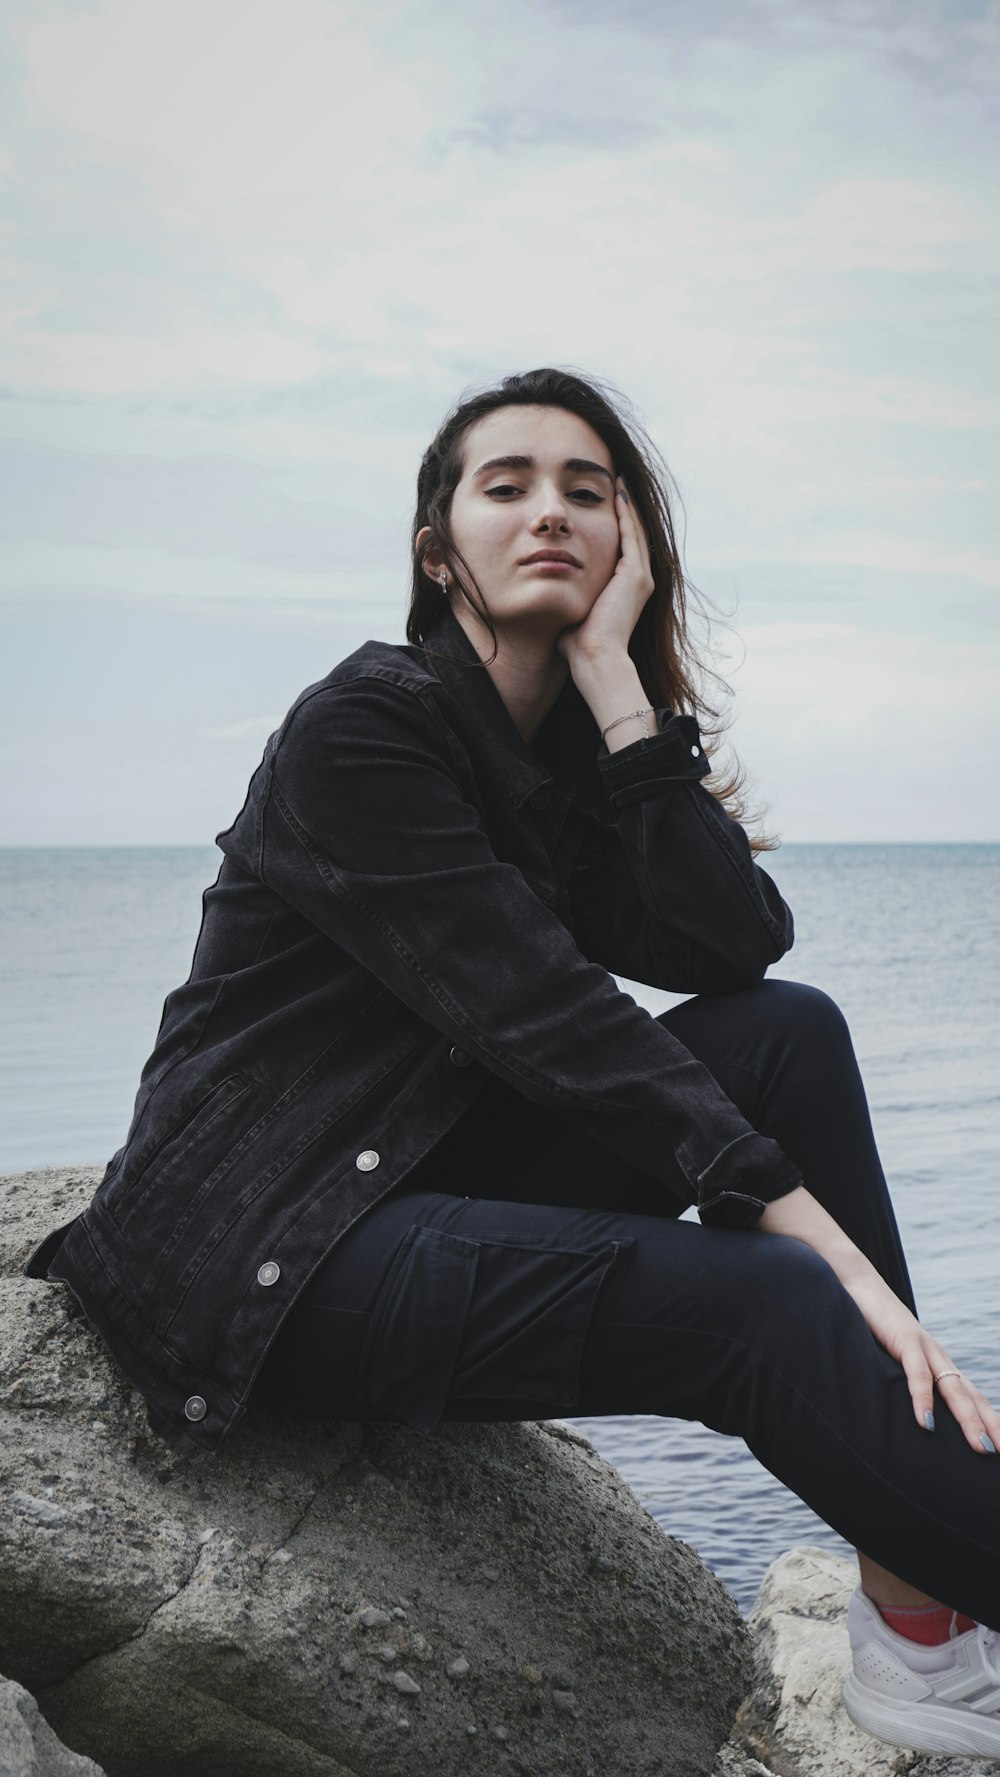 woman in black coat sitting on rock near sea during daytime